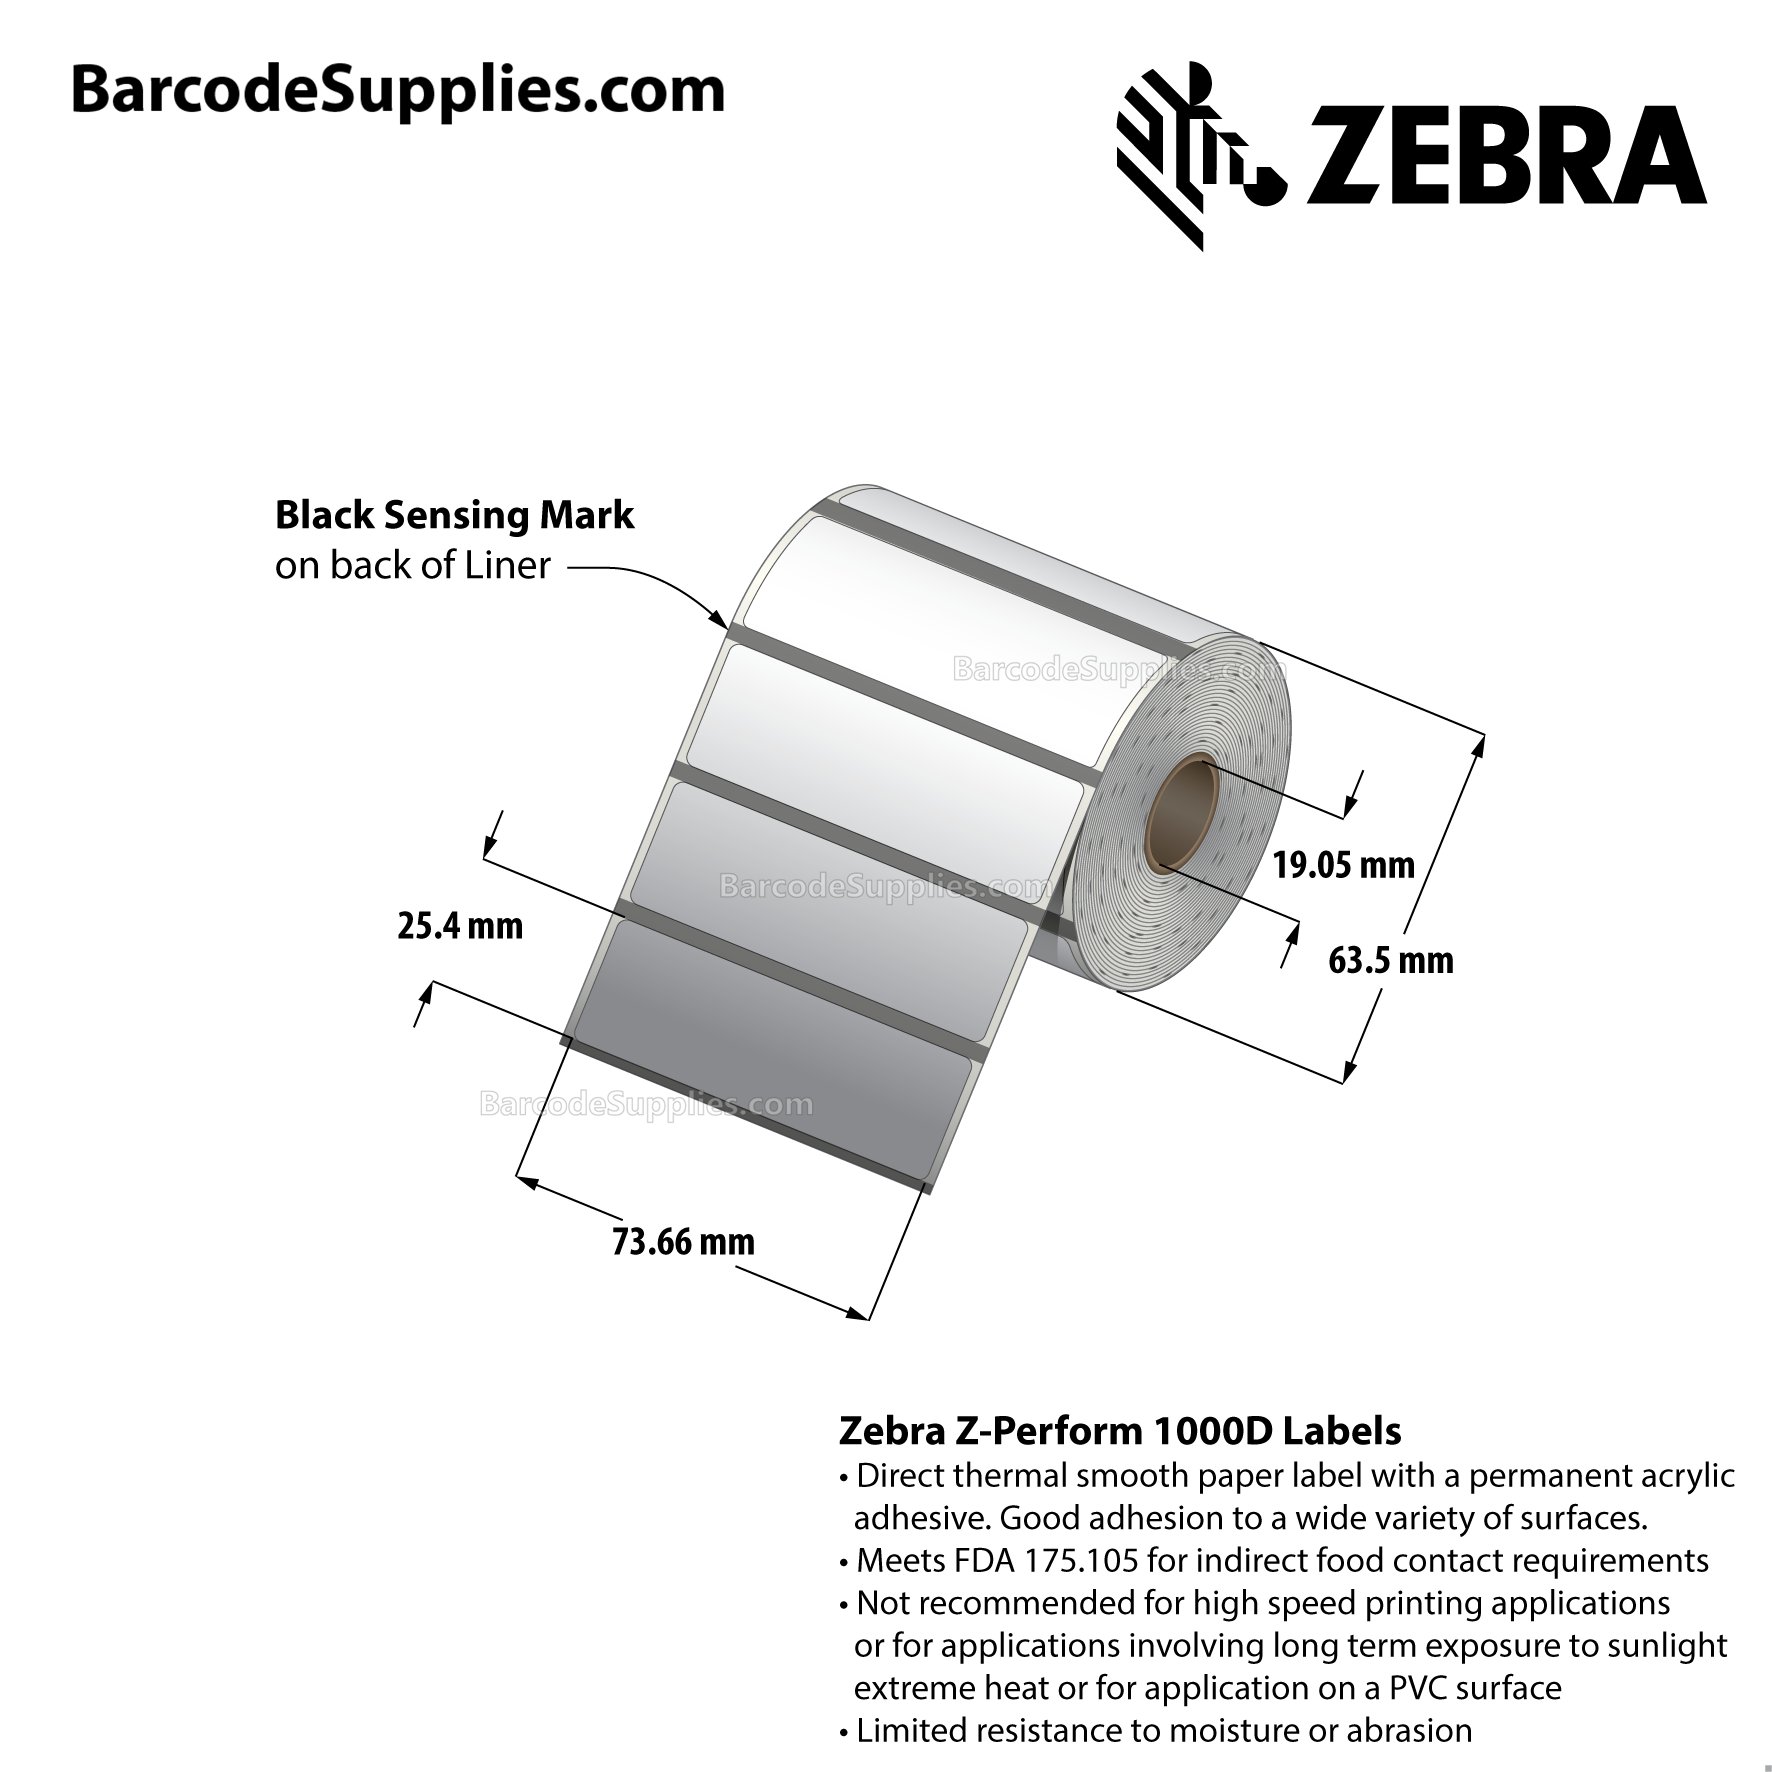 2.9 x 1 Direct Thermal White Z-Perform 1000D Labels With Permanent Adhesive - Black mark sensing - Not Perforated - 575 Labels Per Roll - Carton Of 36 Rolls - 20700 Labels Total - MPN: LD-R3TU5B